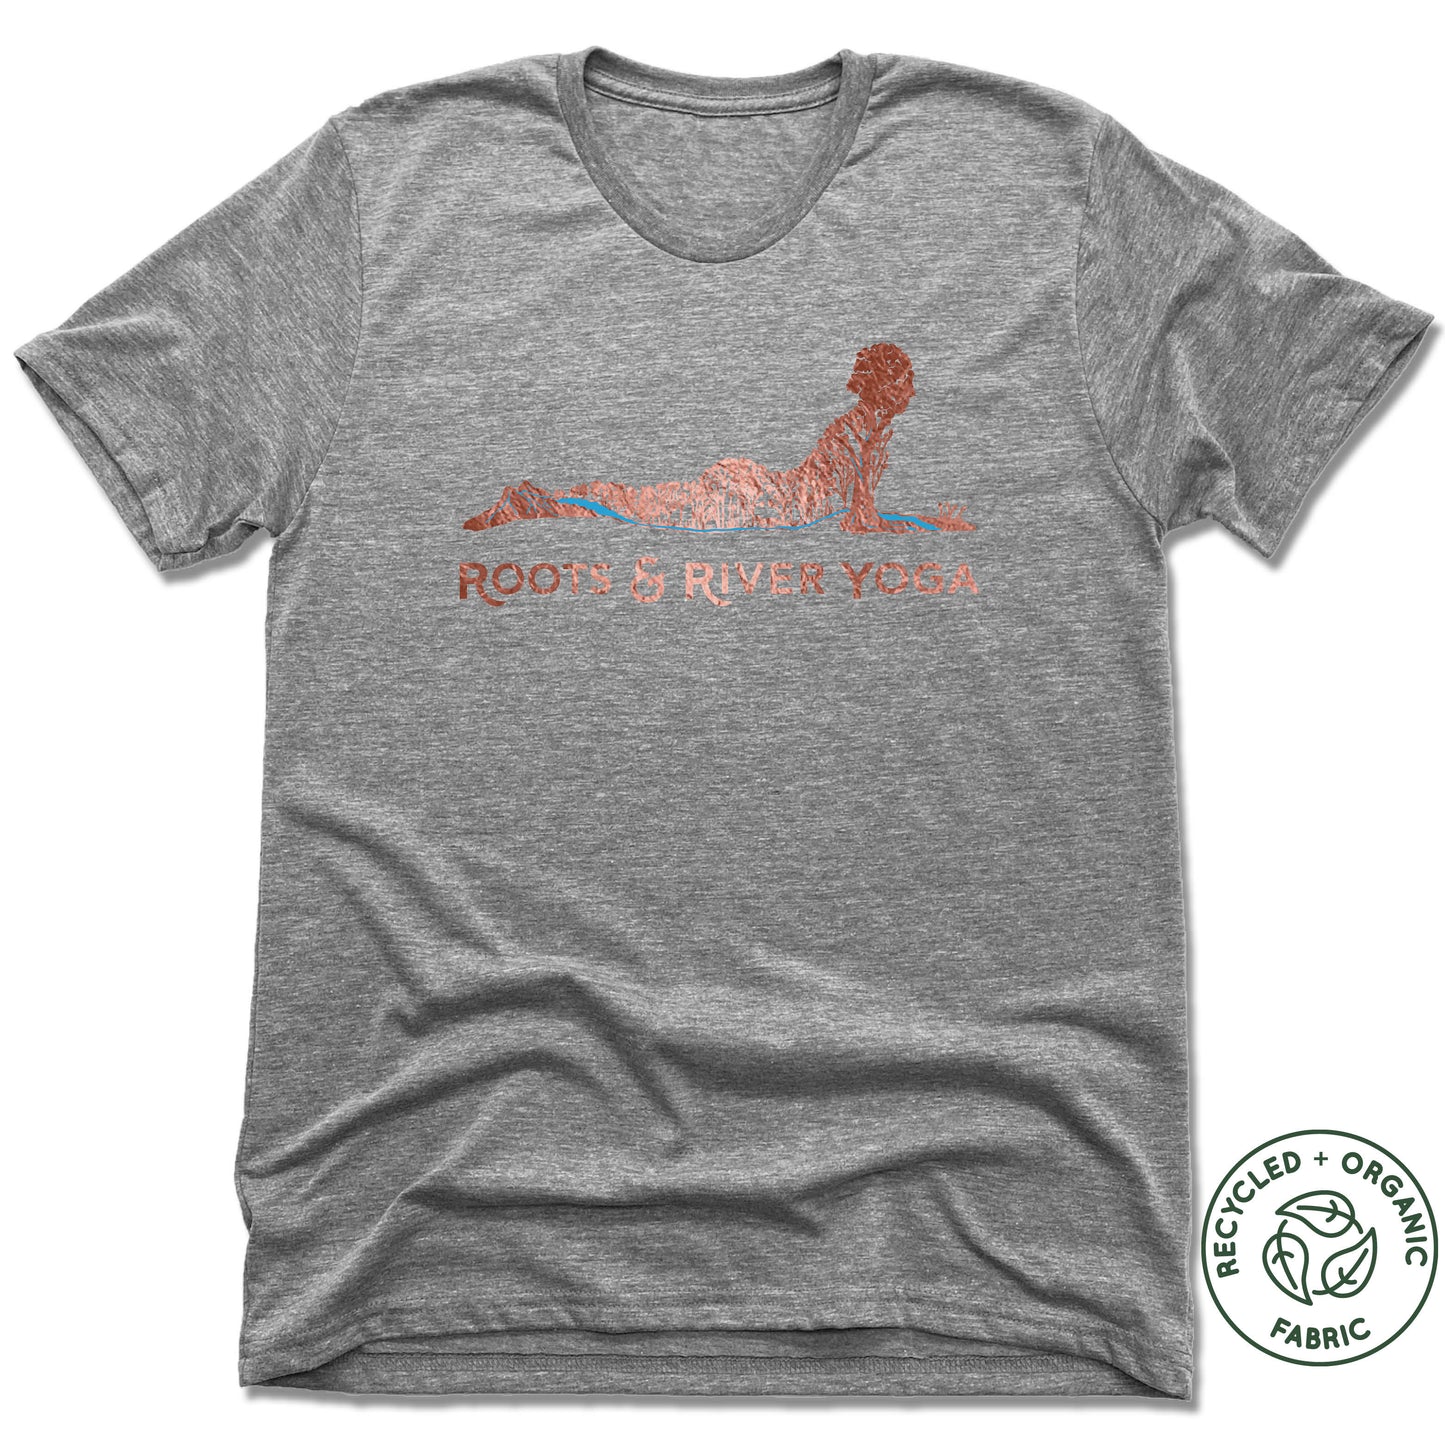 ROOTS & RIVER YOGA | UNISEX GRAY Recycled Tri-Blend | ROSE GOLD LOGO